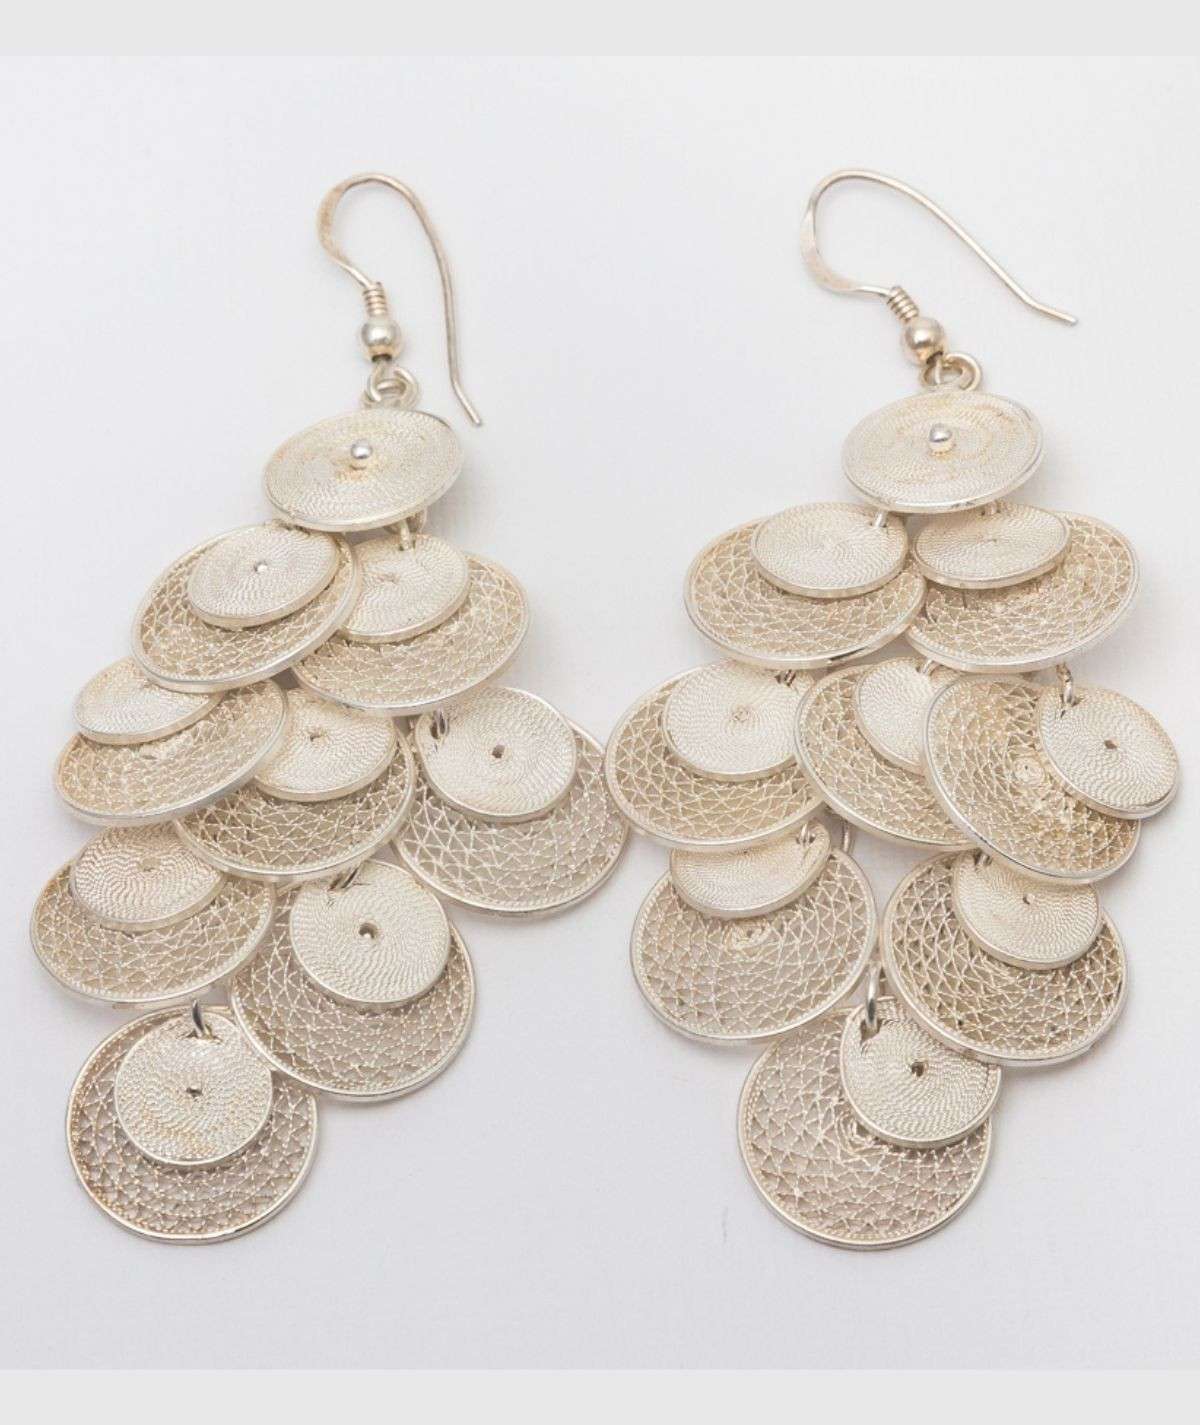 Statement Filigree Earrings made by ARTEMANOS